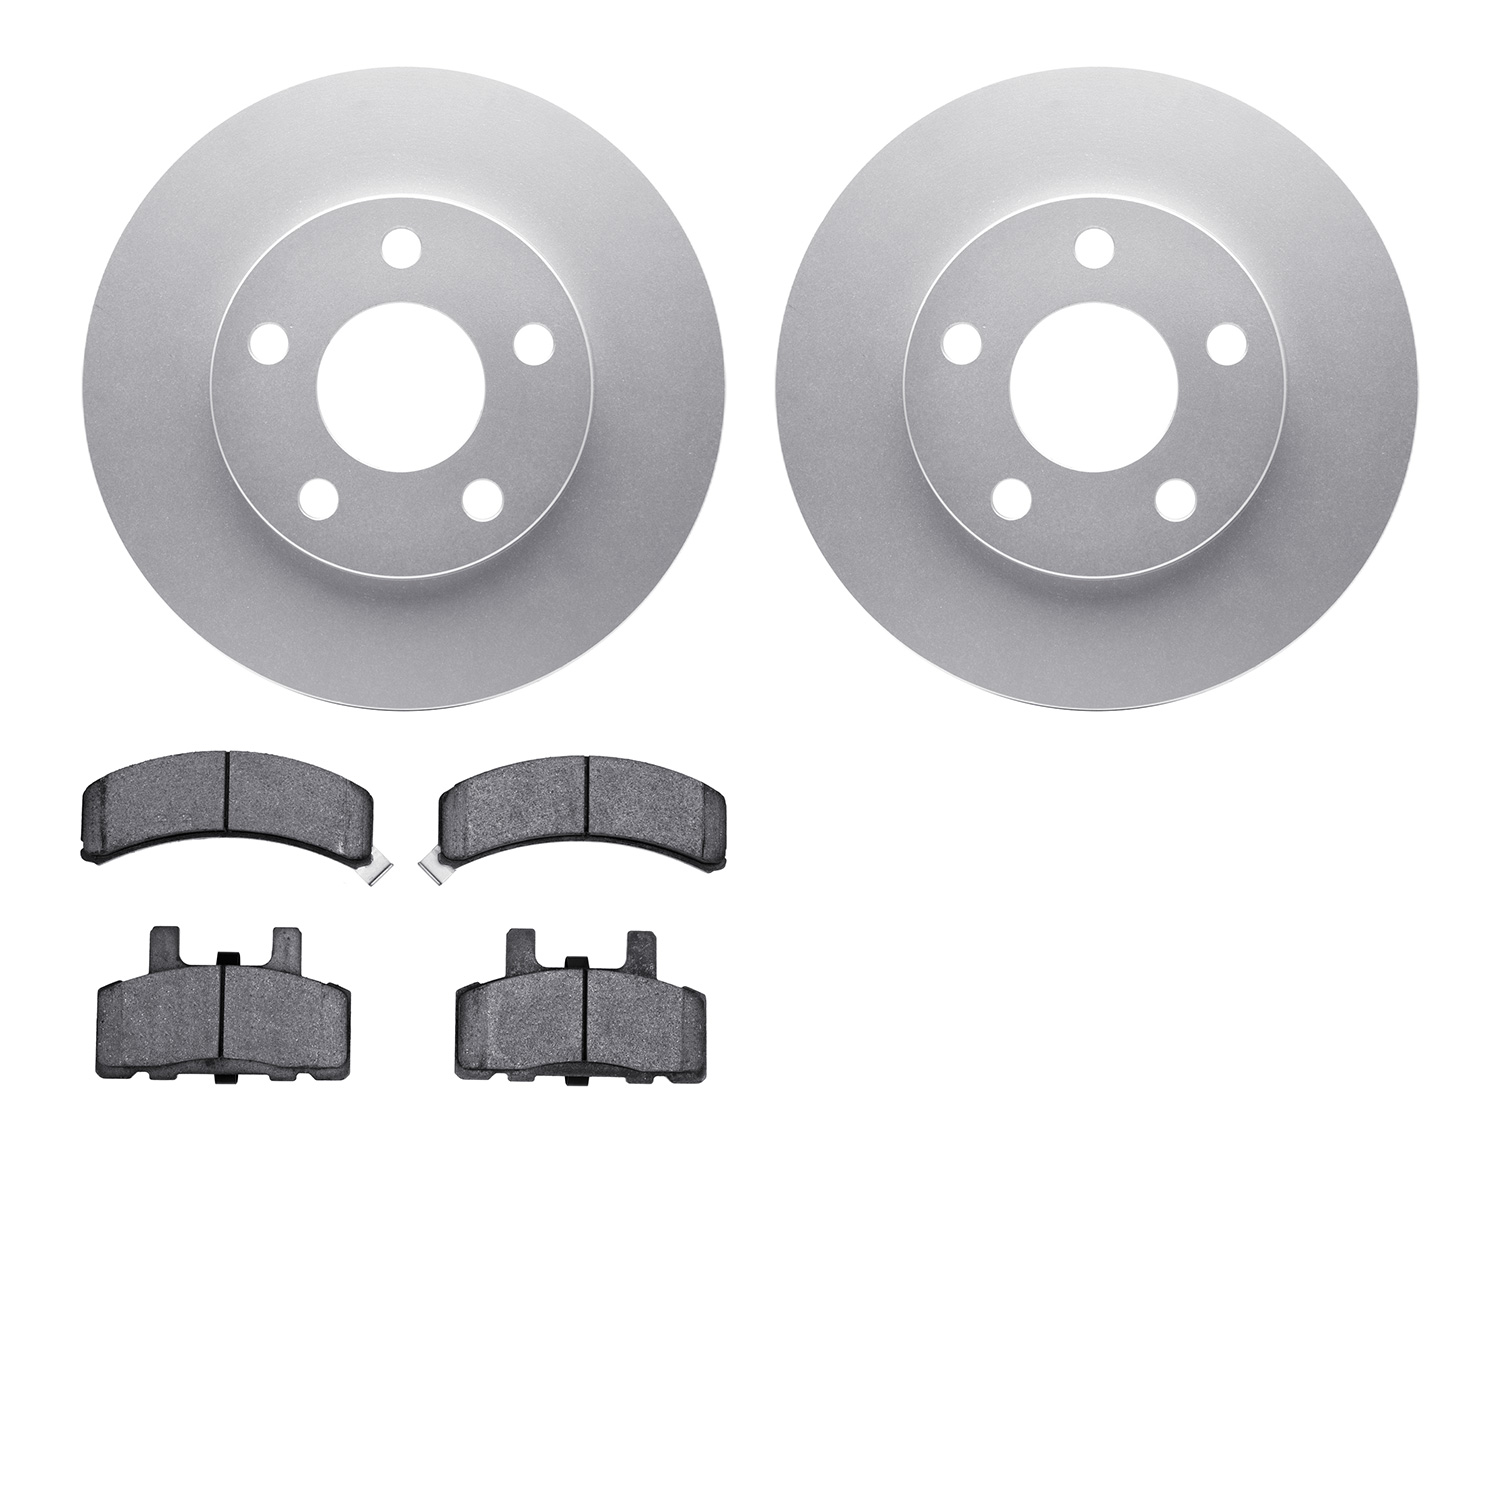 4402-47002 Geospec Brake Rotors with Ultimate-Duty Brake Pads Kit, 1990-1993 GM, Position: Front